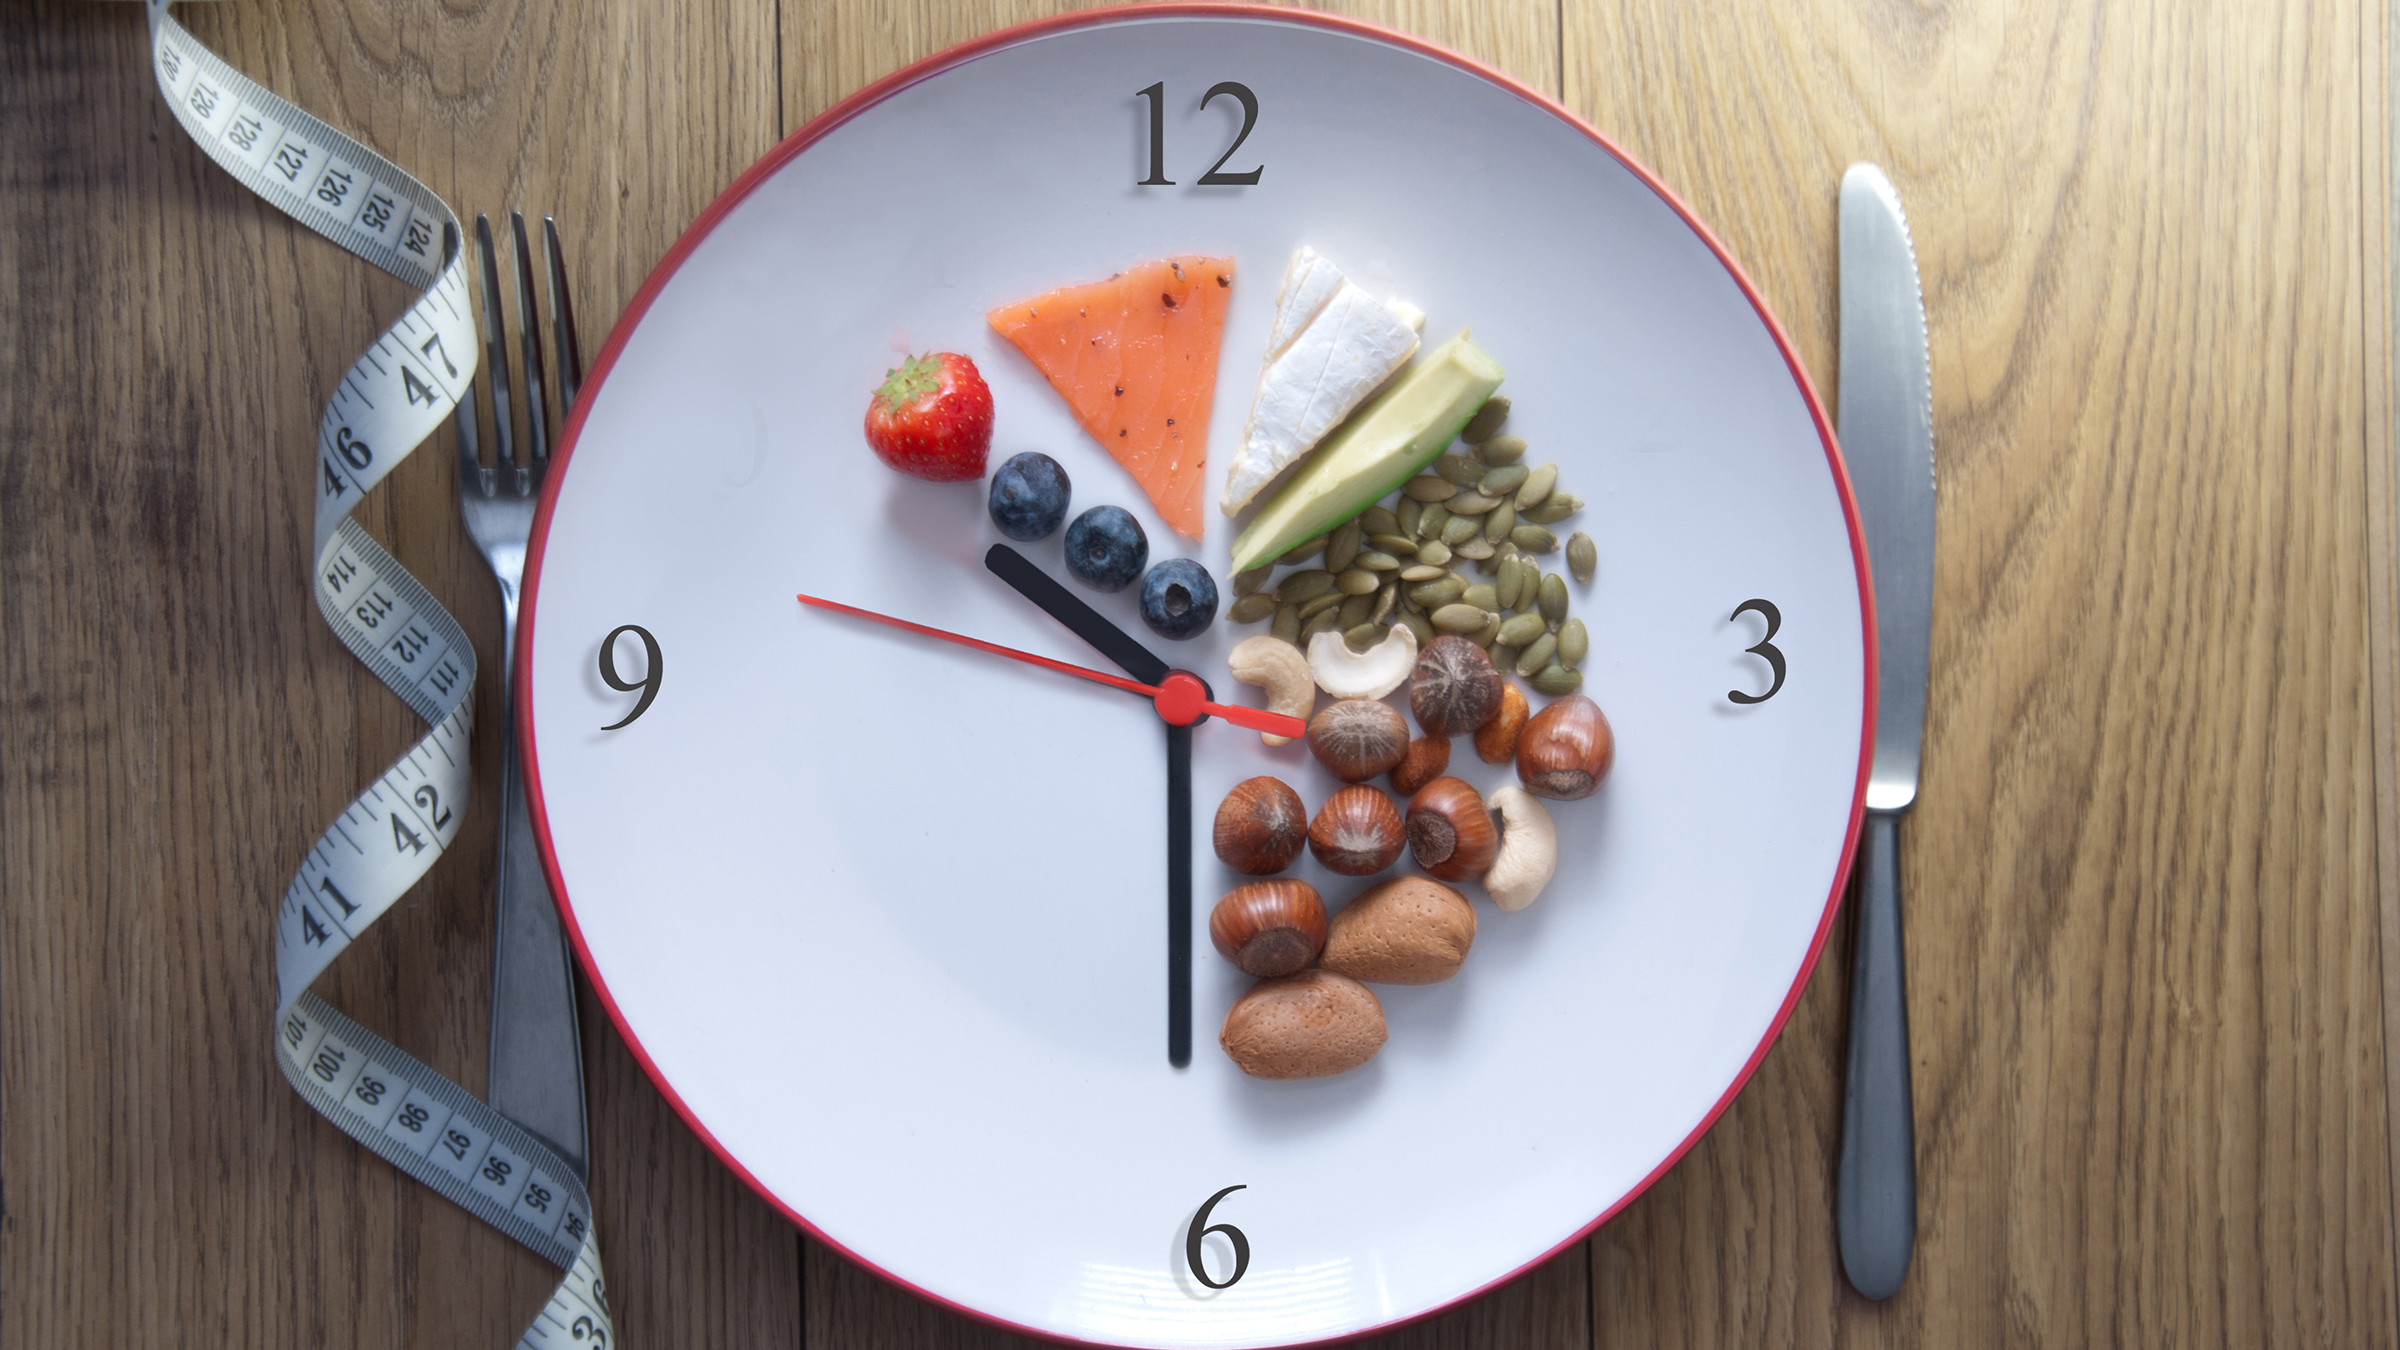 featured image for Fasting-like diet lowers risk factors for disease, reduces biological age in humans